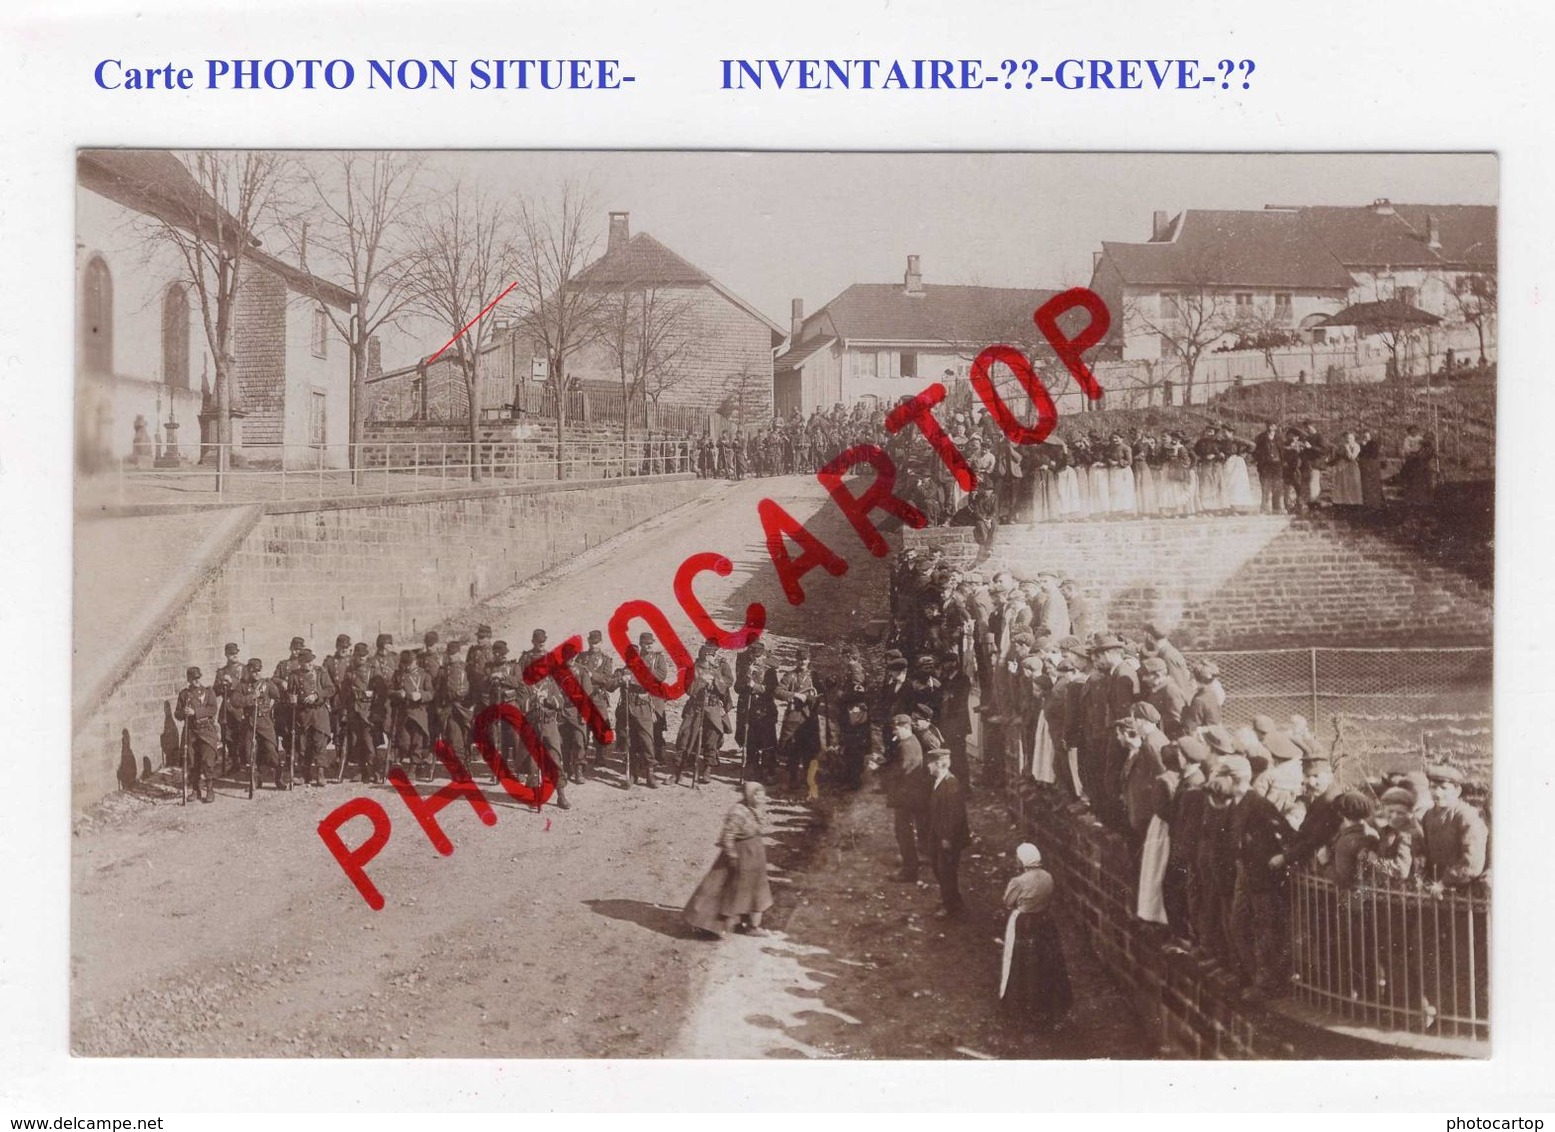 INVENTAIRE-GREVE-??-ARMEE-CARTE PHOTO Francaise NON SITUEE-FRANCE- - Streiks